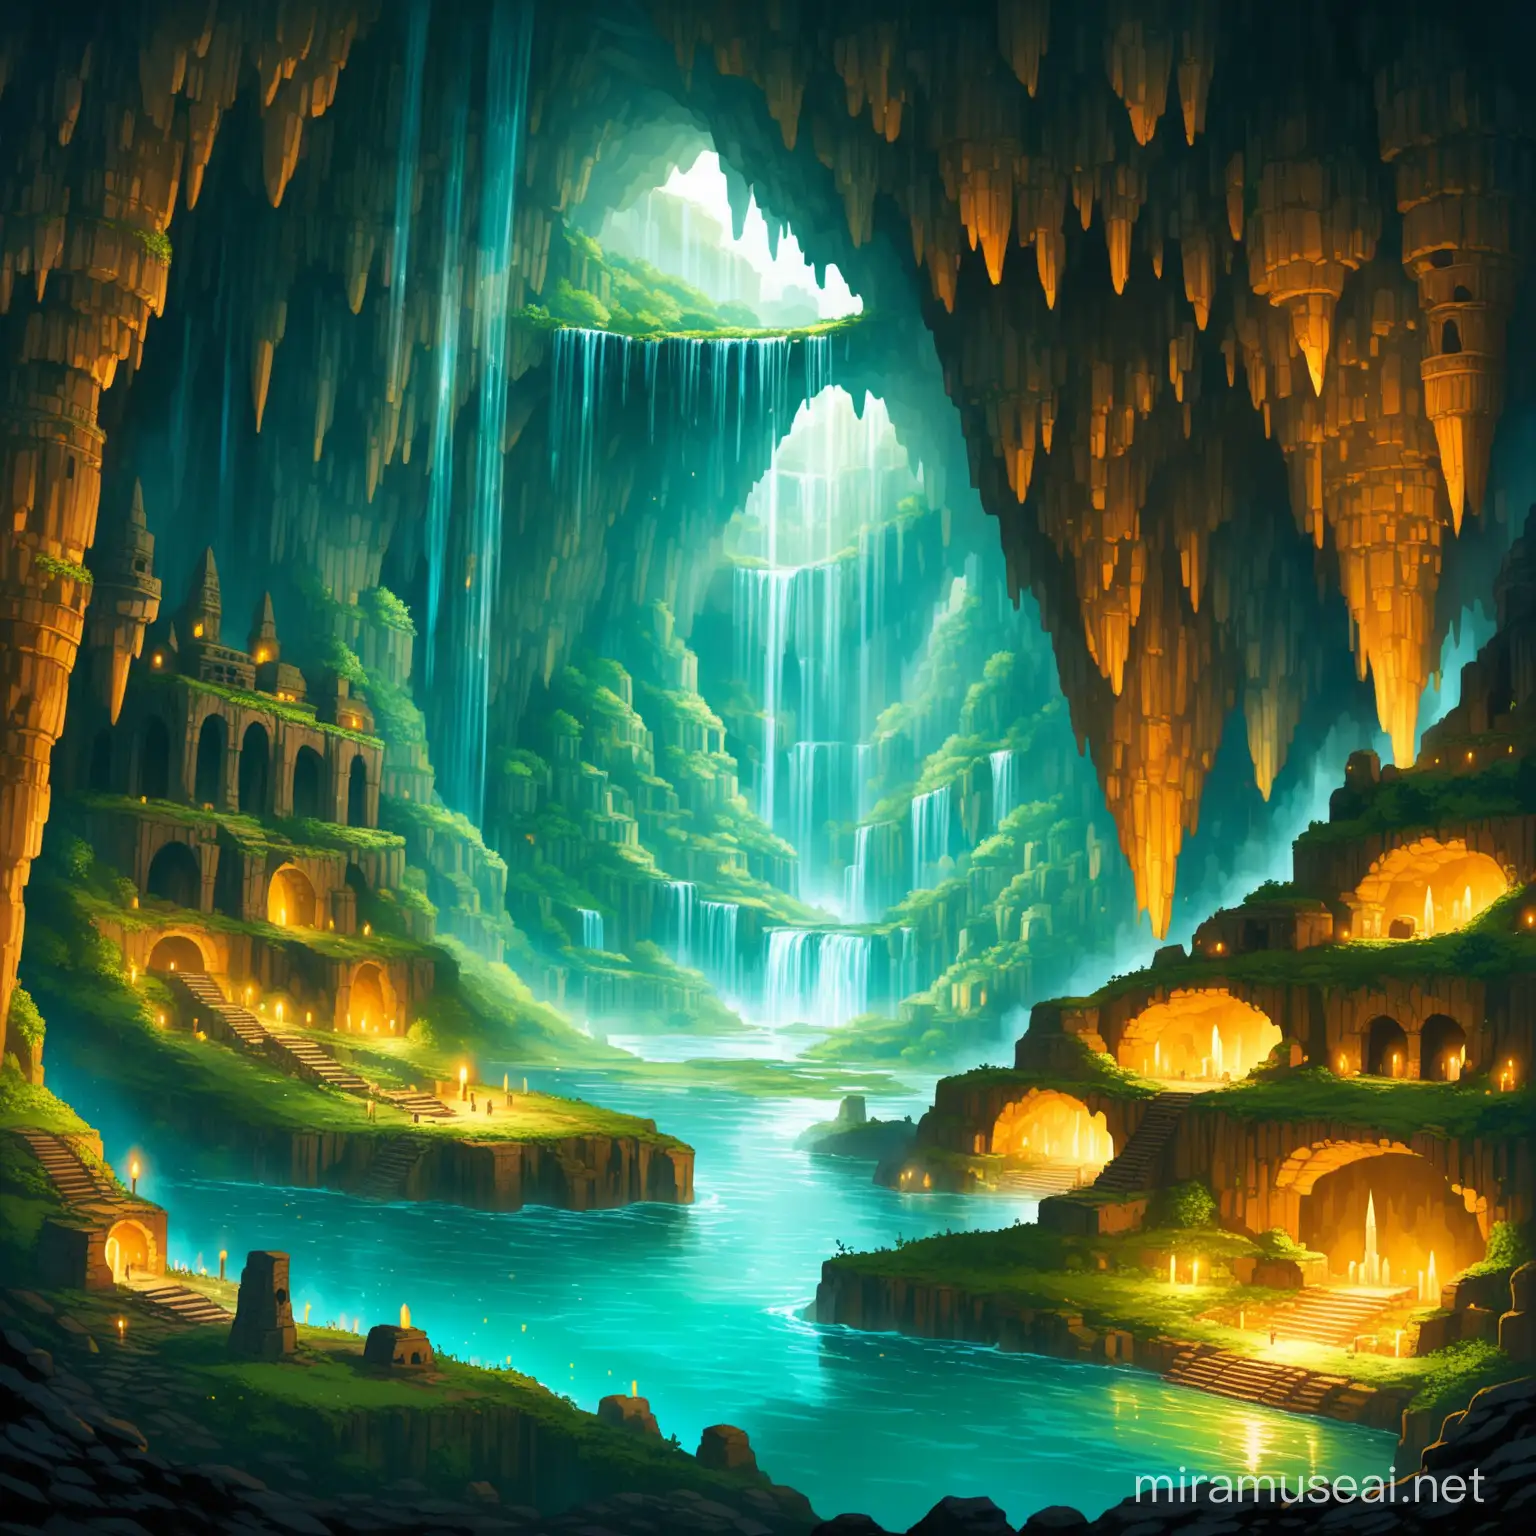 Magical Underground City with Crystal Catacombs and Waterfalls